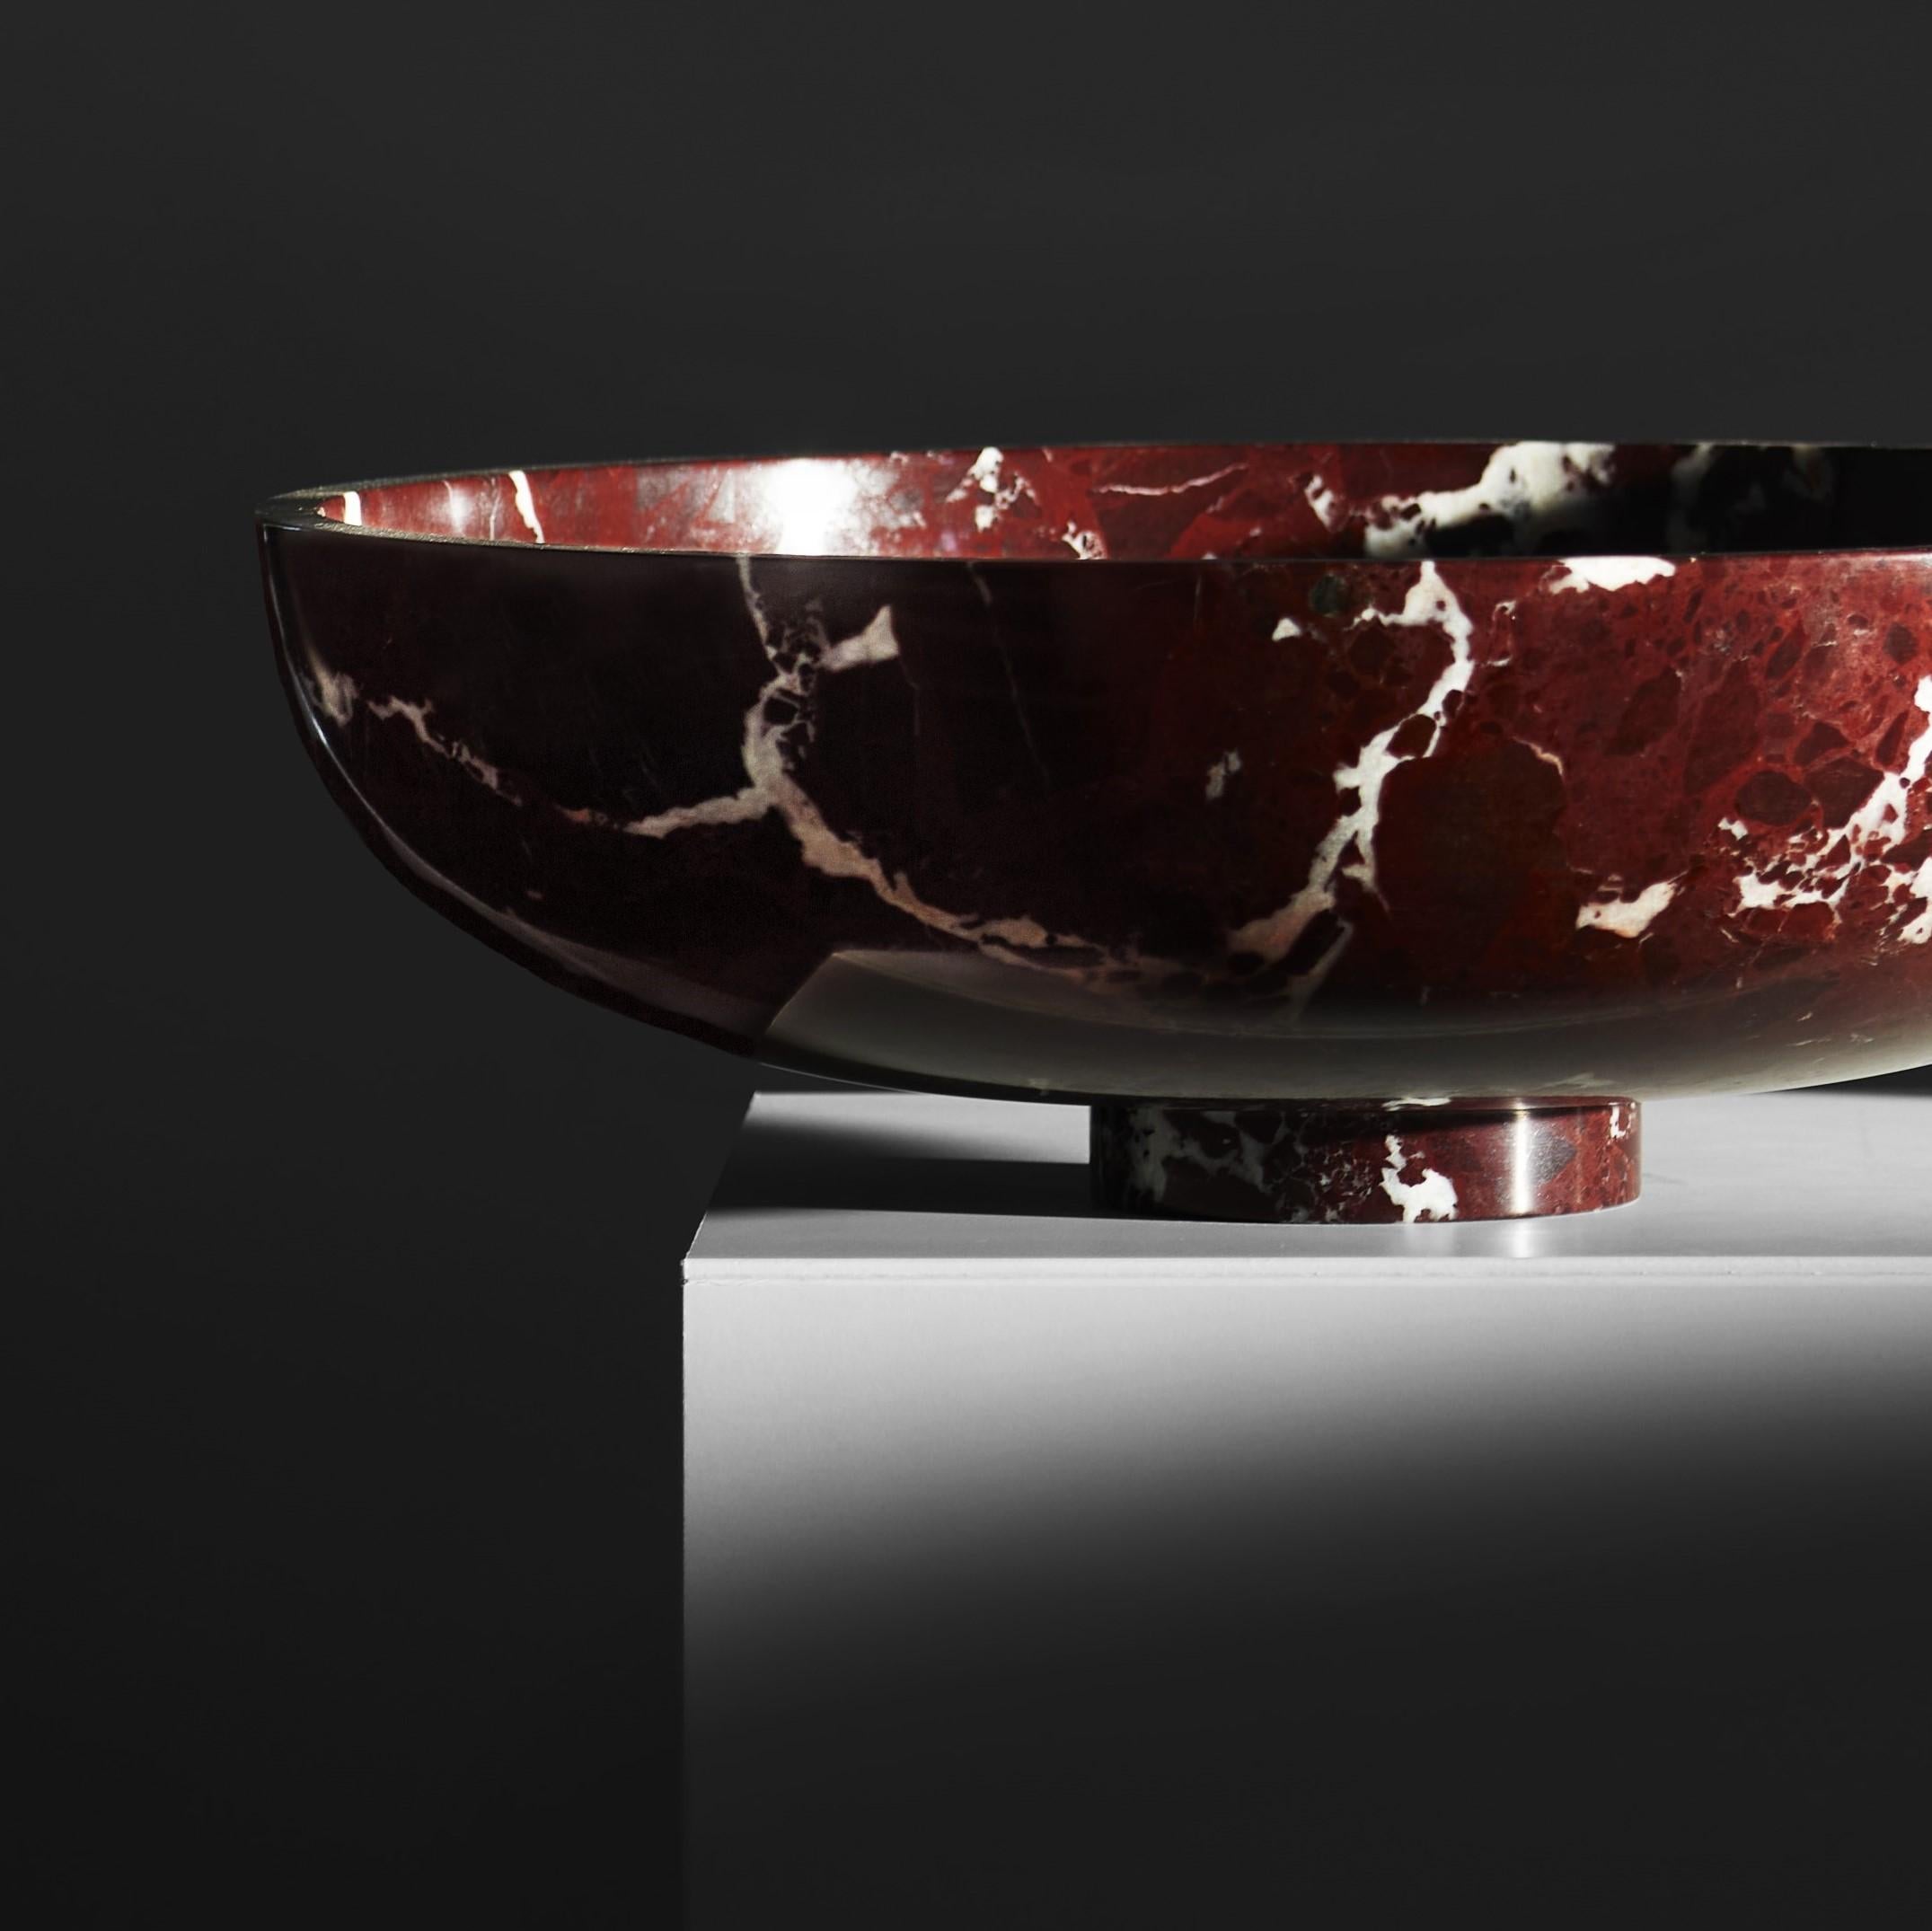 Twosidestory bowl XL by Lisette Rützou.
Dimensions: D 40 cm
Materials: Levanto Bordeaux Marble.

 Lisette Rützou’s design is motivated by an urge to articulate a story. Inspired by the beauty of materials, form and architecture, each design is